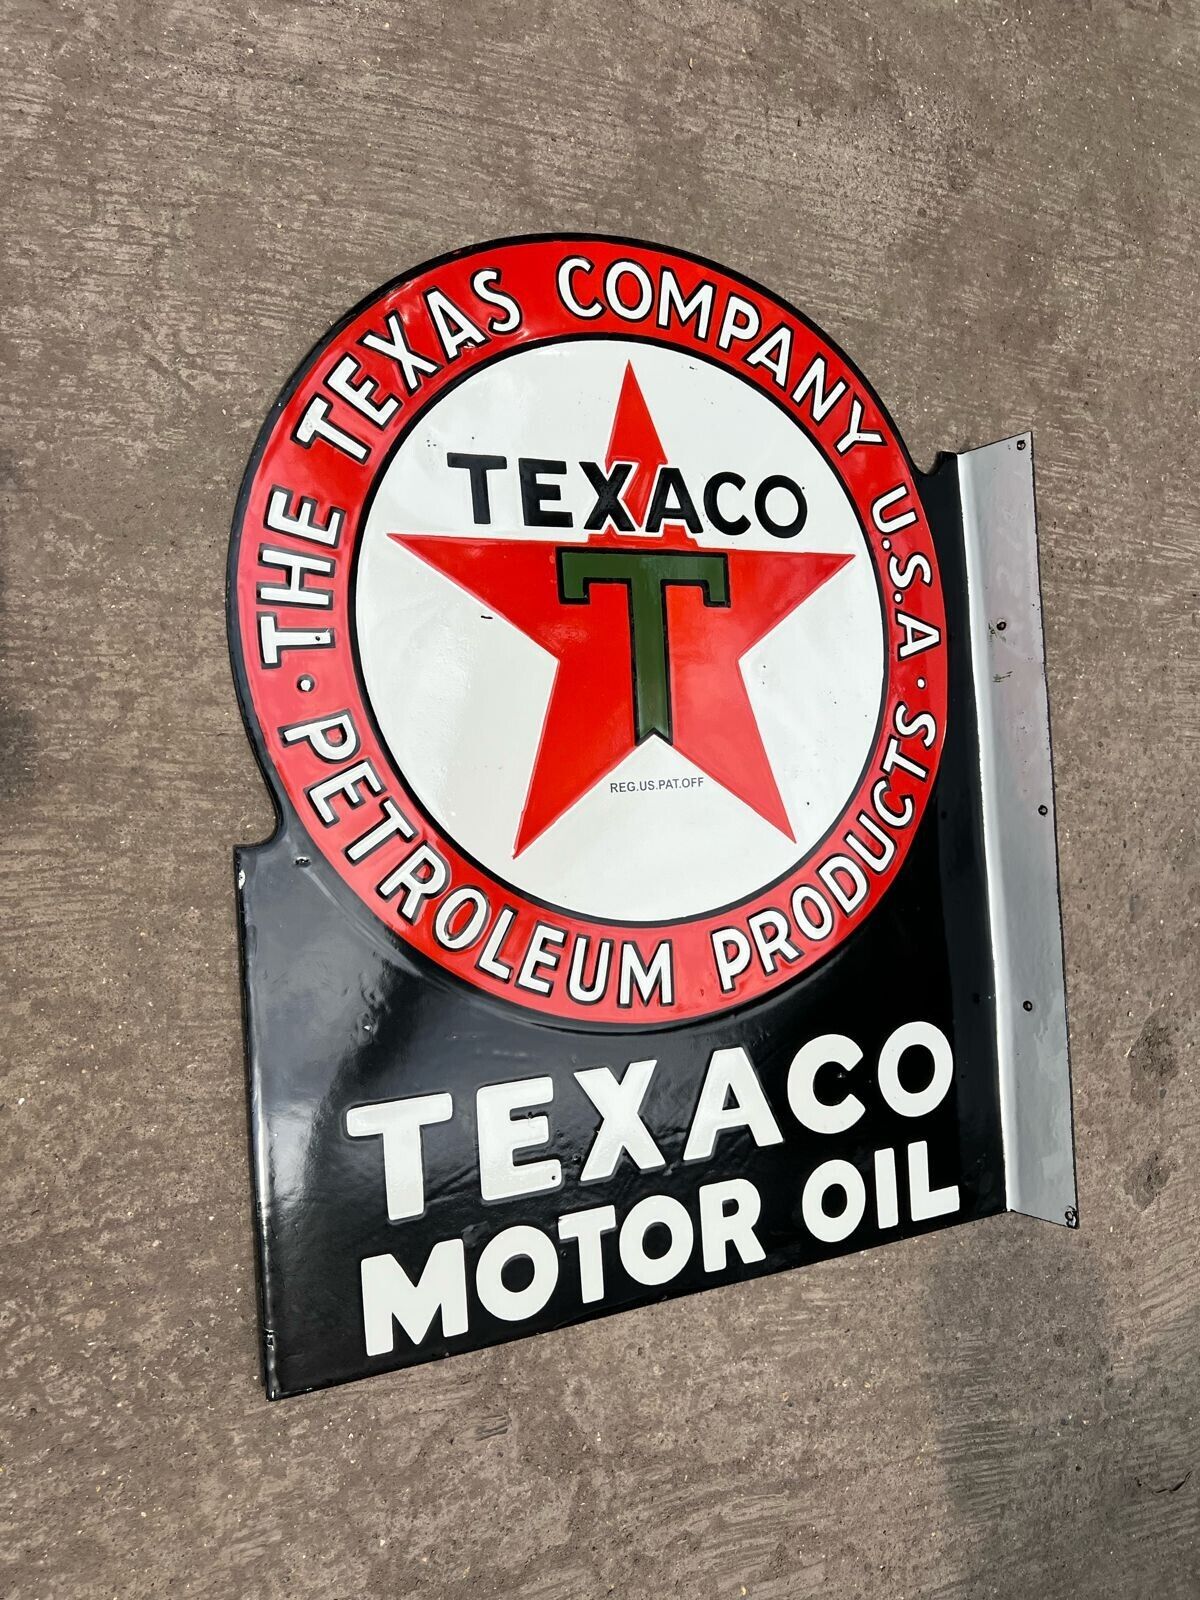 PORCELAIN TEXACO MOTOR OIL ENAMEL SIGN 27X22 INCHES DOUBLE SIDED WITH FLANGE